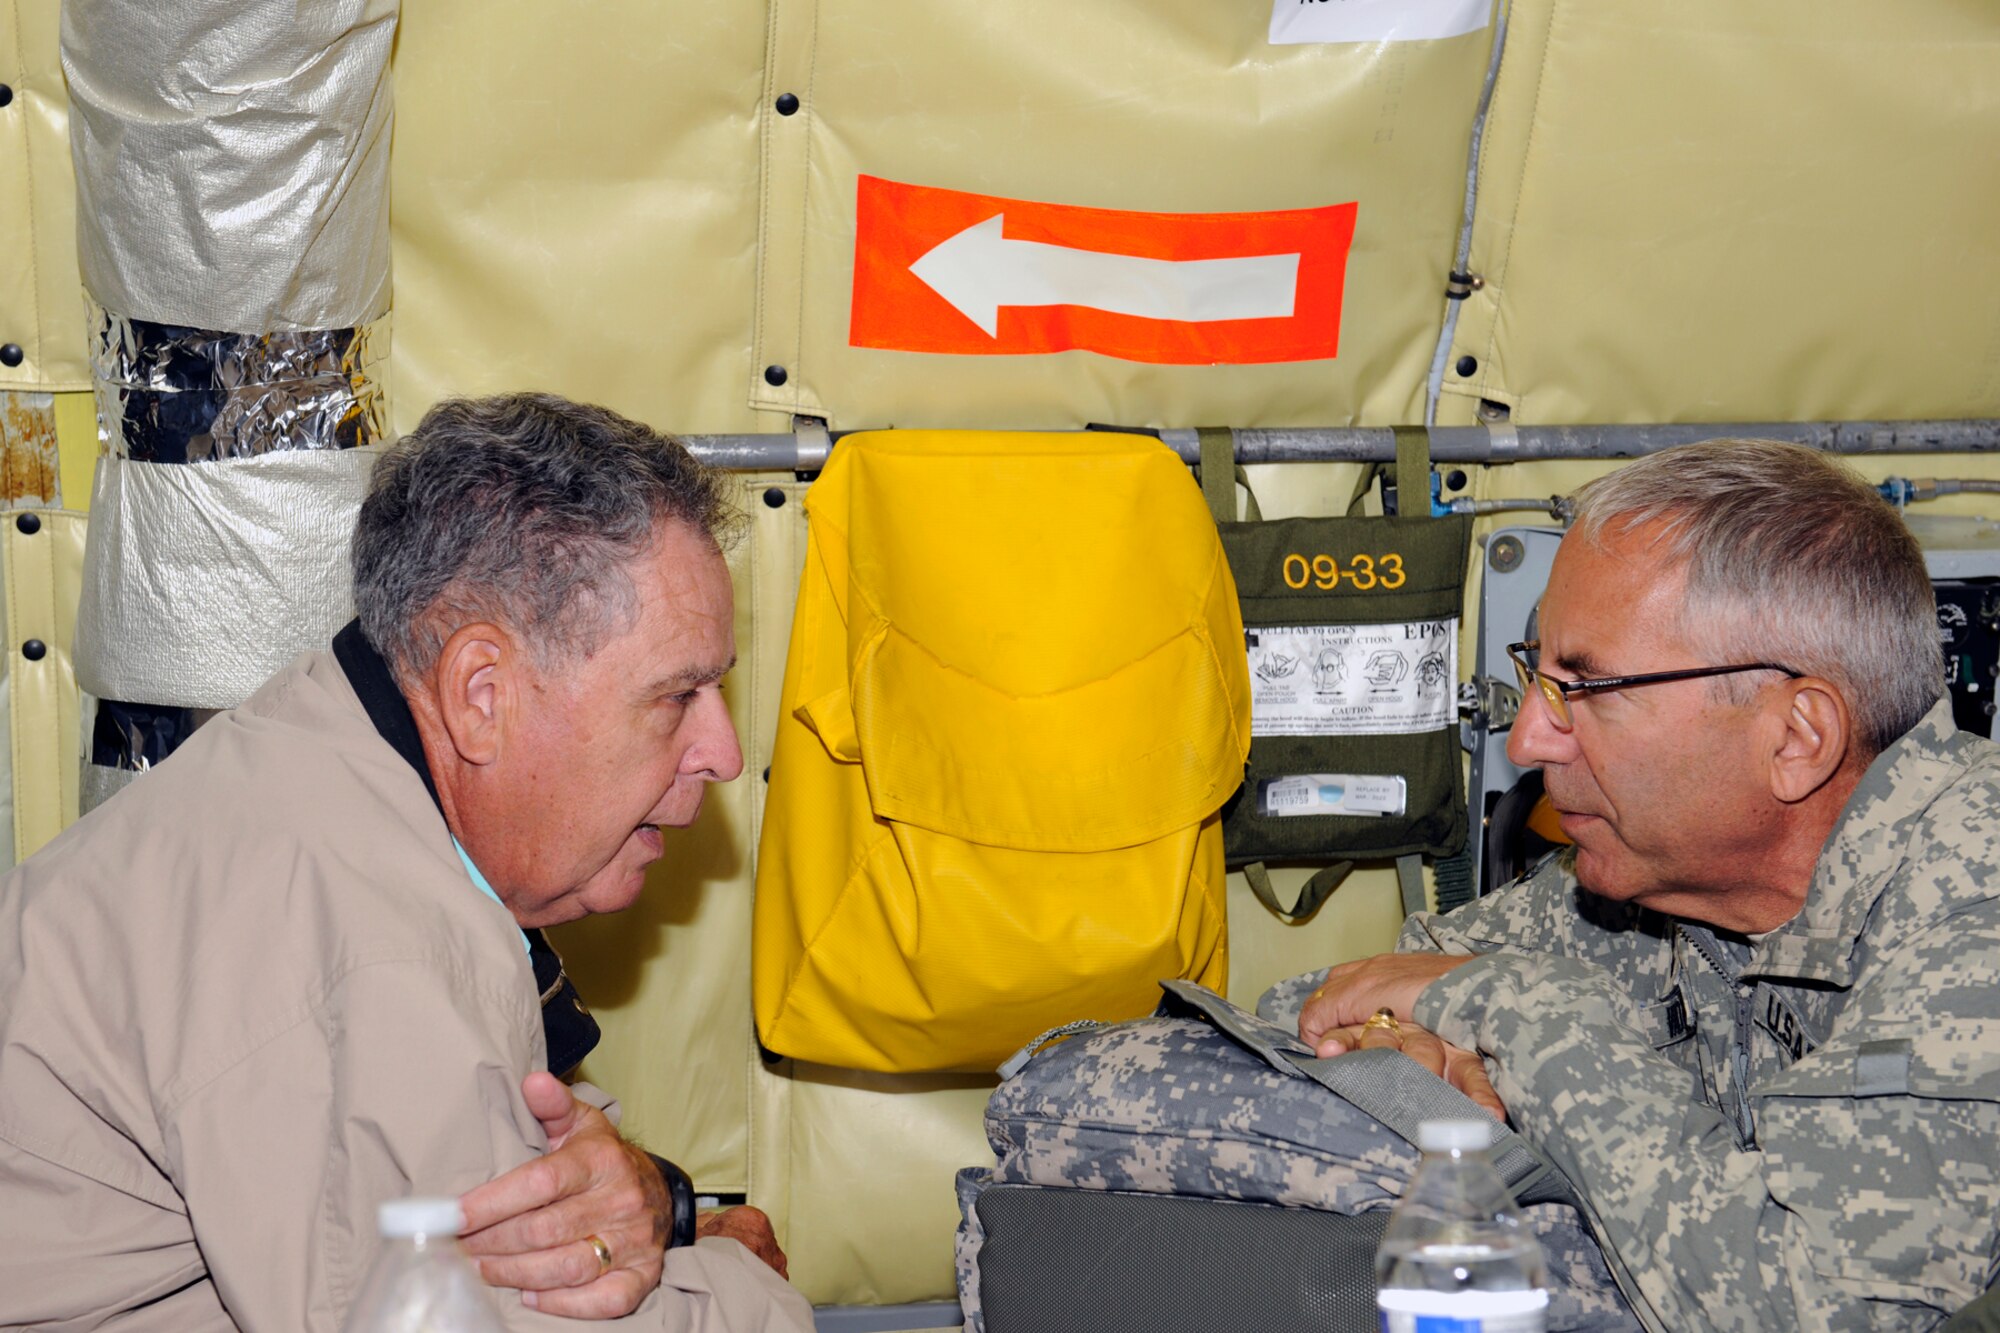 130913-Z-EZ686-205 – Lt. Gen. (ret.) Dennis McCarthy, chairman of the National Commission on the Structure of the Air Force, talks with Major Gen. Gregory Vadnais, adjutant general of Michigan, while aboard a KC-135 Stratotanker flown by the 171st Air Refueling Squadron, Sept. 13, 2014. Members of the commission visited Selfridge Air National Guard Base and the Alpena Combat Readiness Training Center Sept. 13-14. The 171st ARS is based at Selfridge. (U.S. Air National Guard photo by MSgt. David Kujawa/Released)